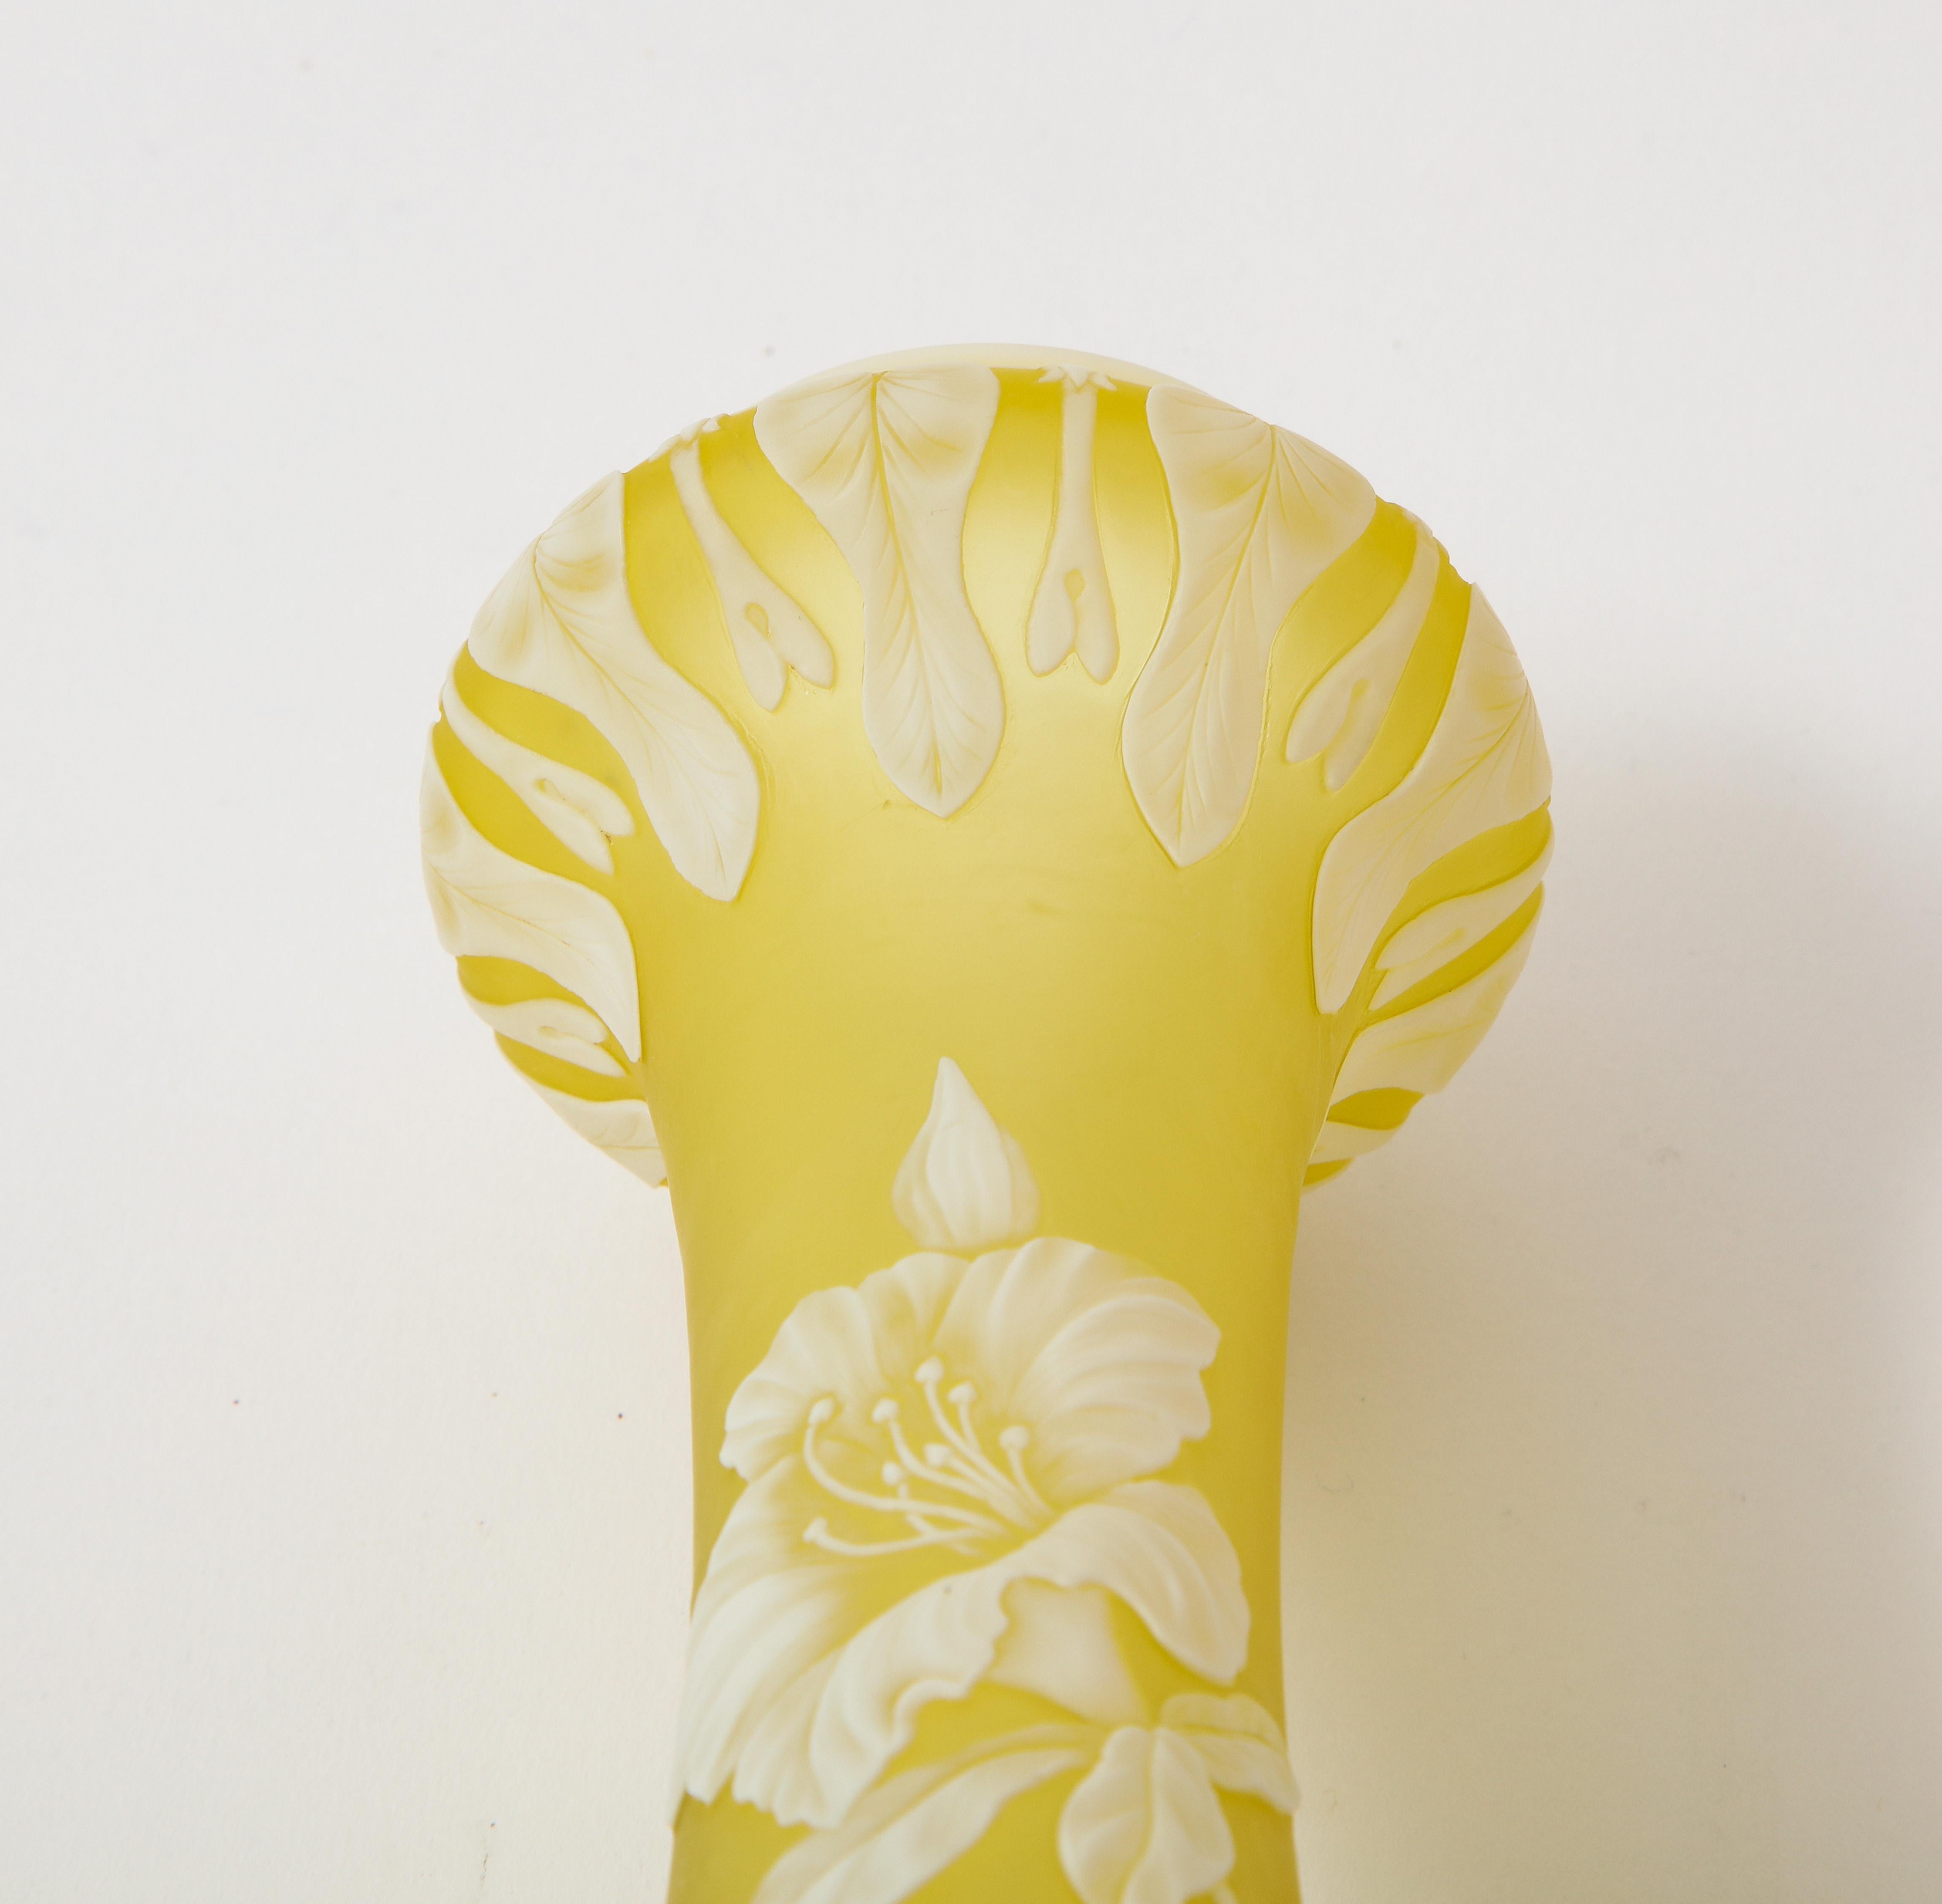 Thomas Webb & Sons Double Overlaid White Over Yellow Etched & Acid Washed Vase For Sale 5